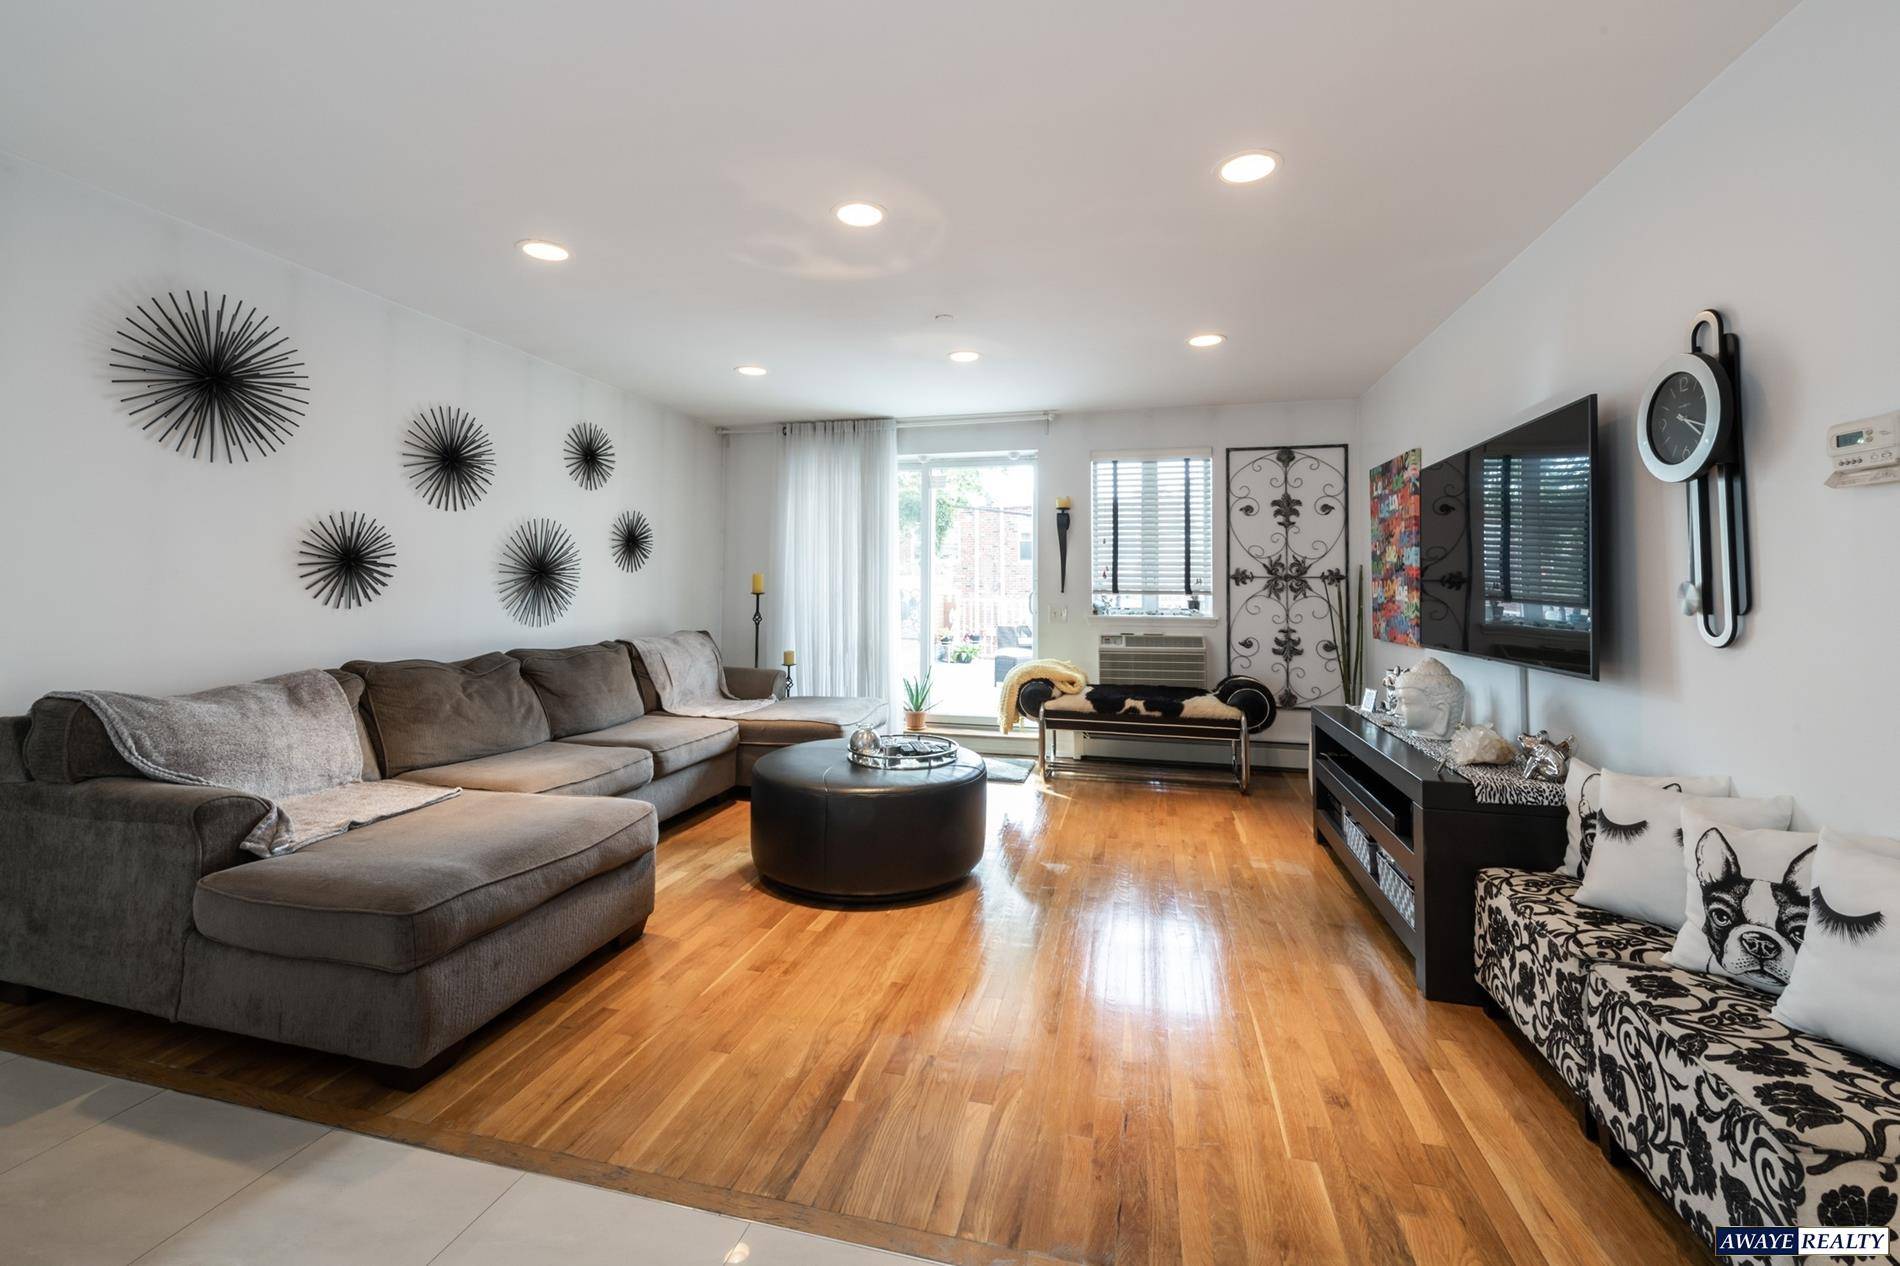 Once in a lifetime opportunity to own this beautiful newly renovated 2 bedrooms, 2 bathrooms condominium apartment in an elevator meticulous building with a tremendous 1000 sq ft terrace, your ...